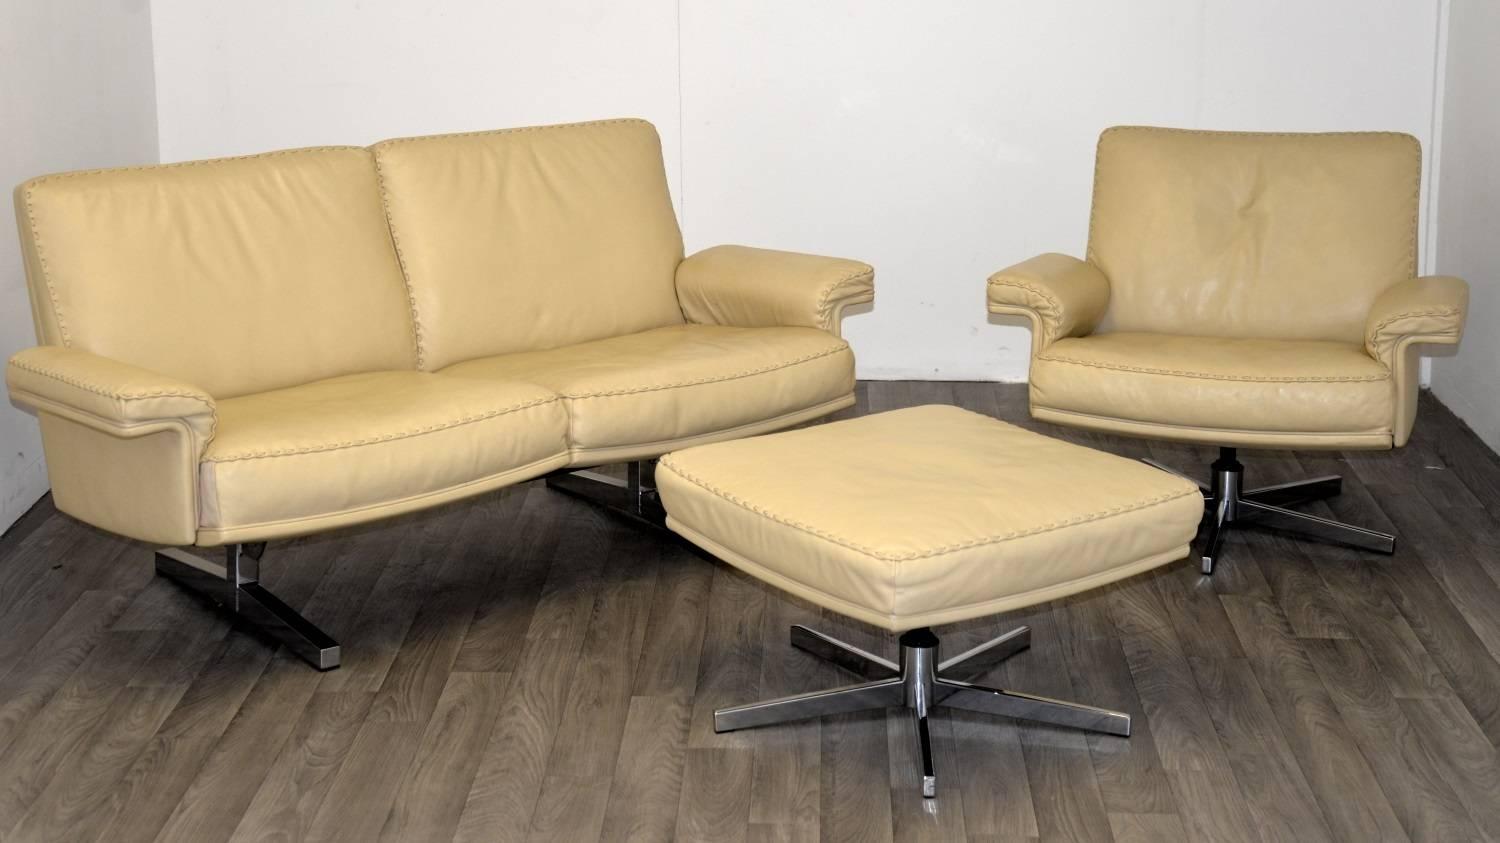 Discounted airfreight for our US Continent and International customers ( from 2 weeks door to door) 

We are delighted to bring to you an extremely rare vintage De Sede DS 35 two-seat sofa and matching swivel lounge armchair and ottoman in beautiful